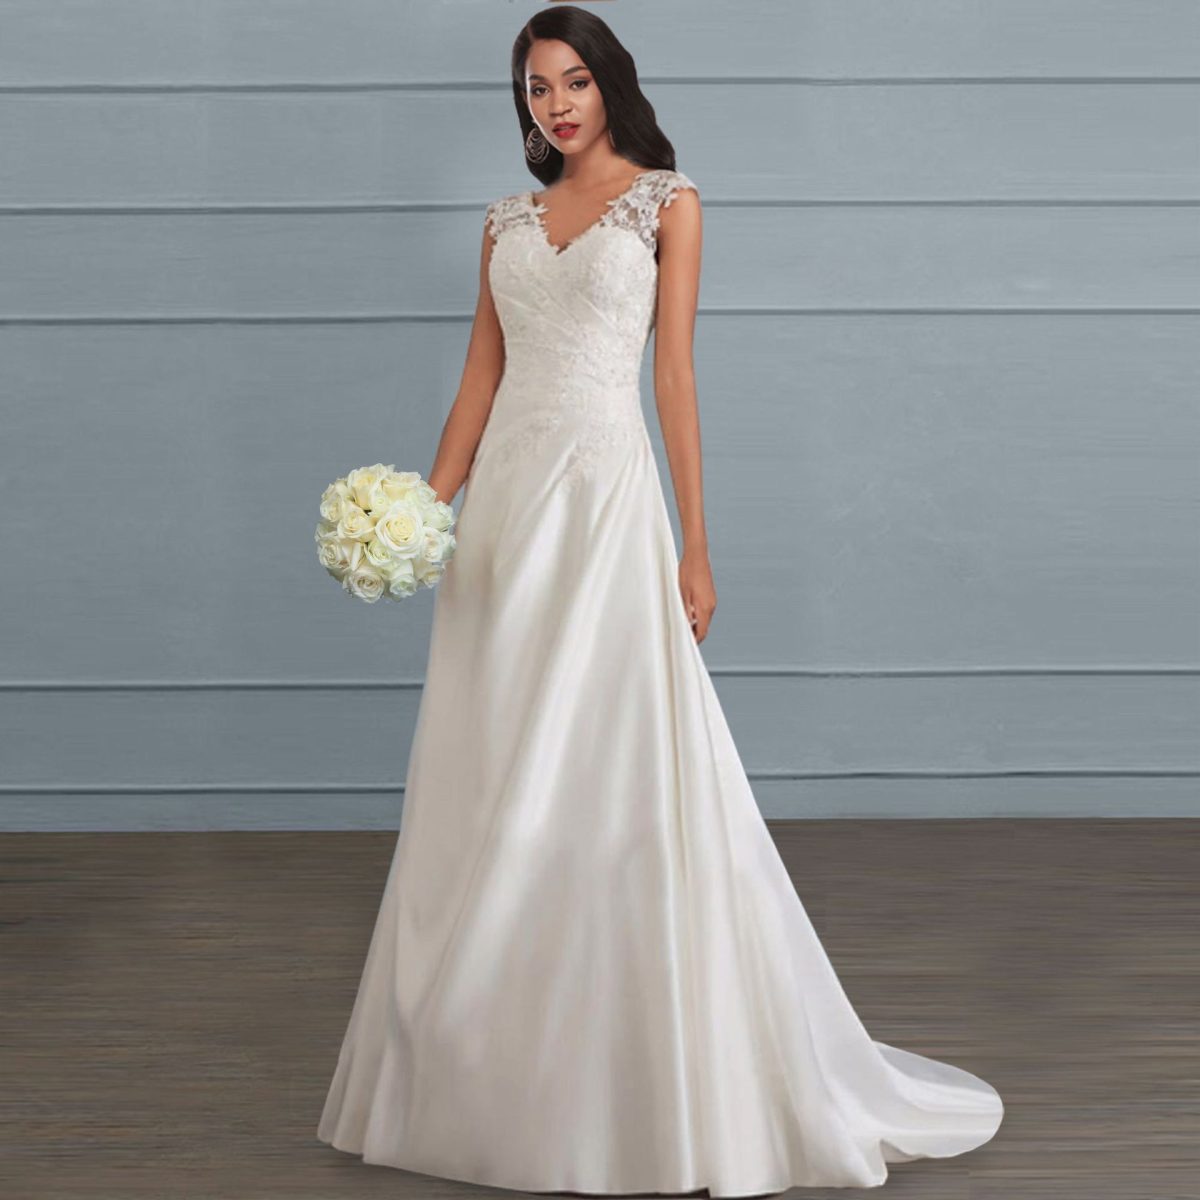 Solid Color Lace Splicing Sling Hollow Out Cutout Backless Wedding Dress in Wedding dresses